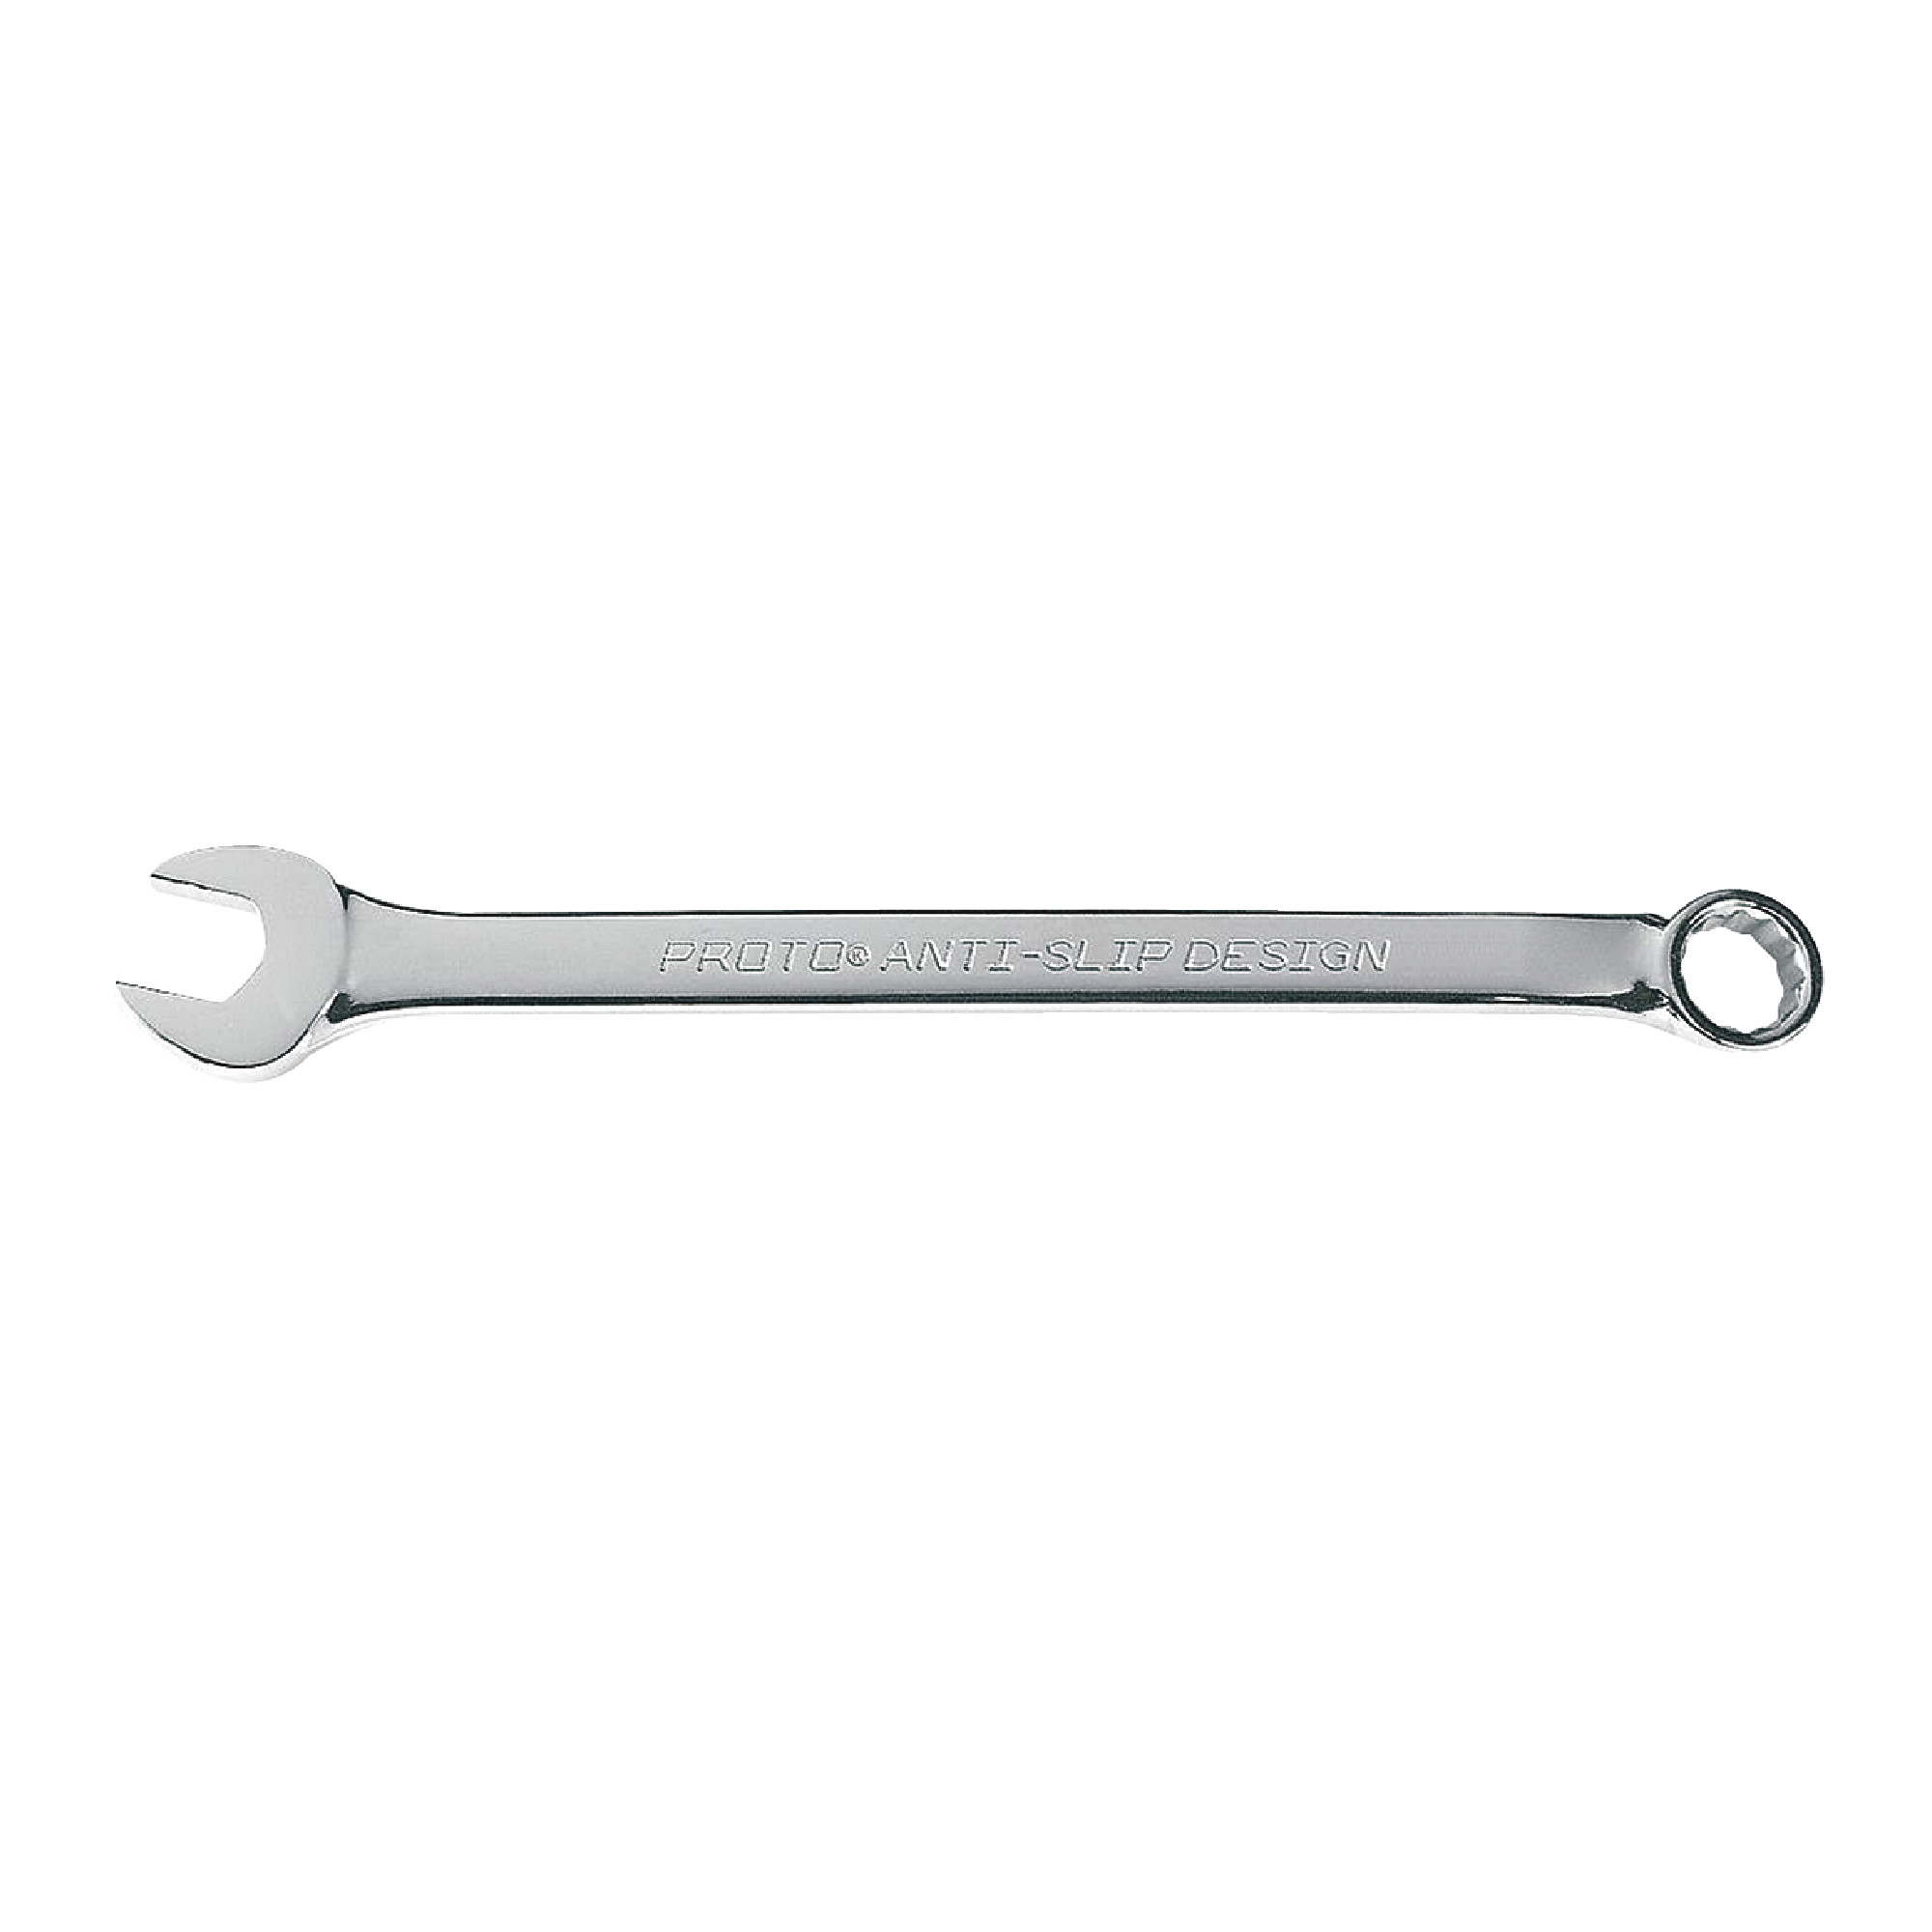 Satin Chrome Finish 20mm Combination Wrench